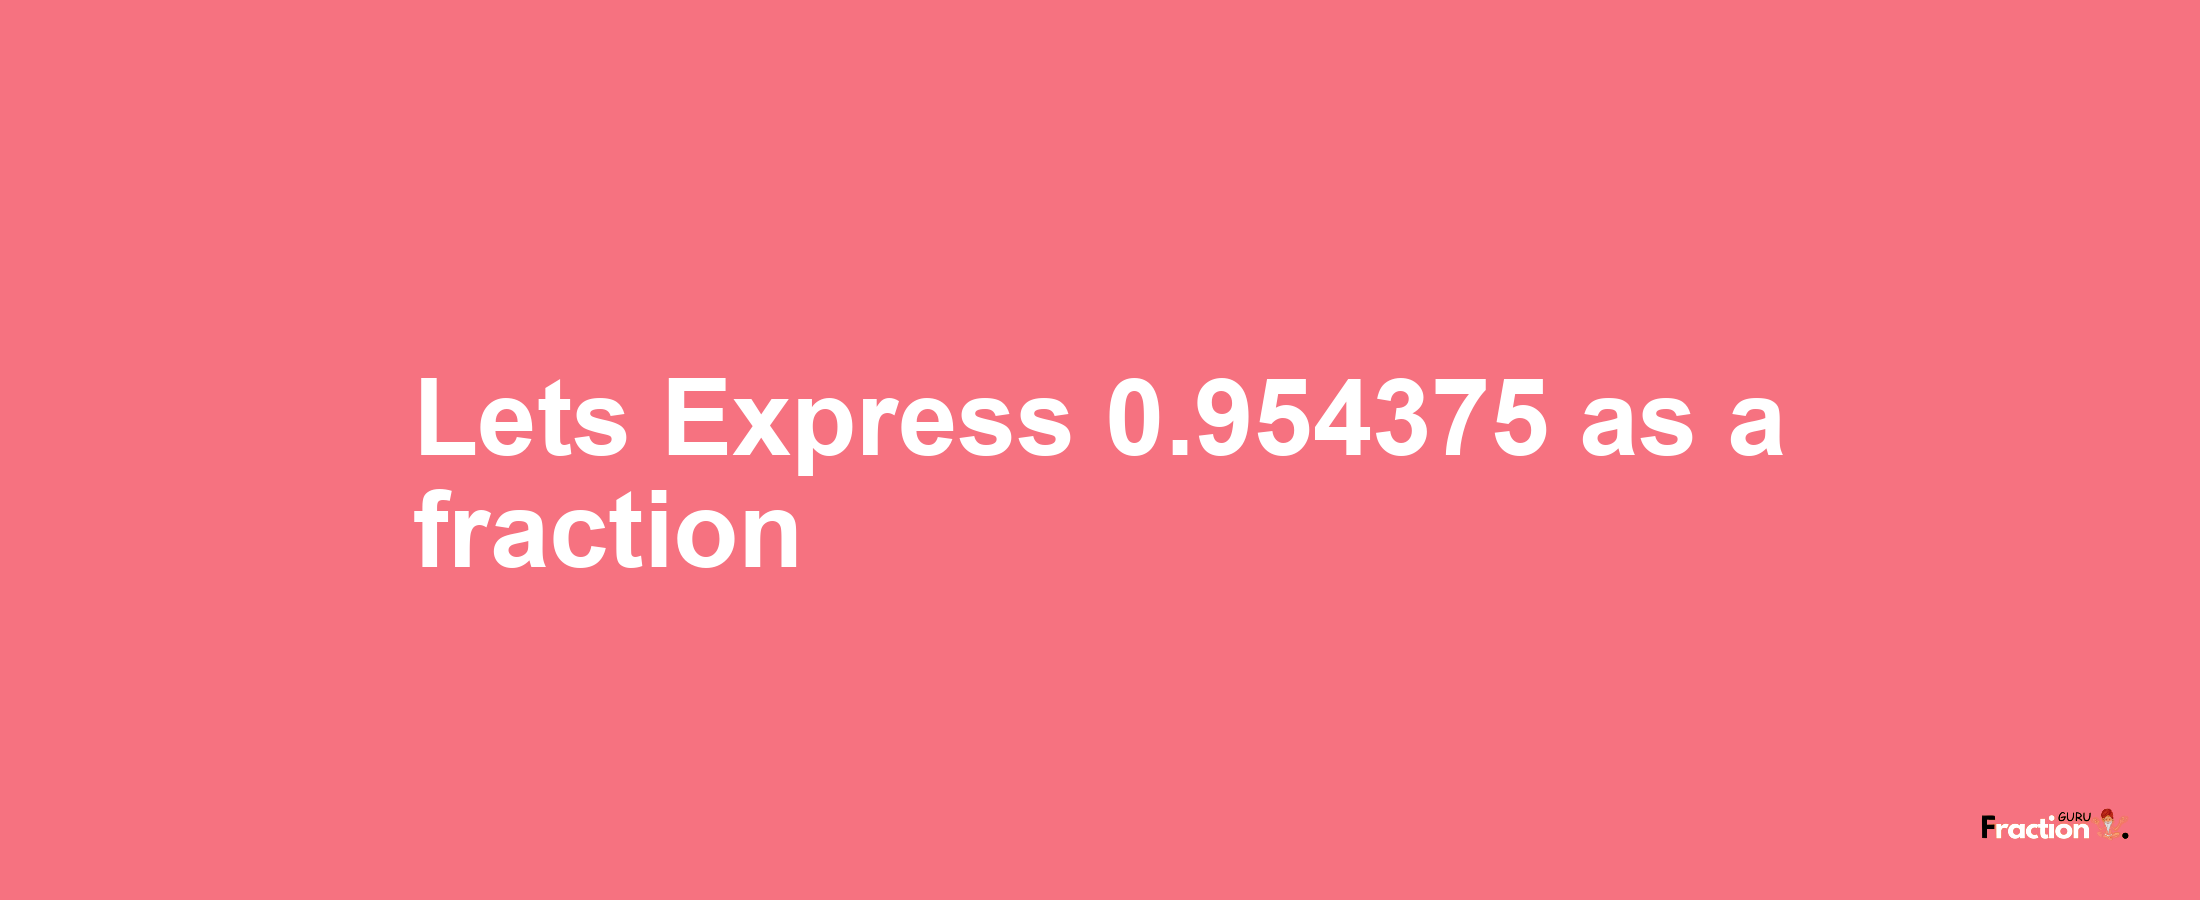 Lets Express 0.954375 as afraction